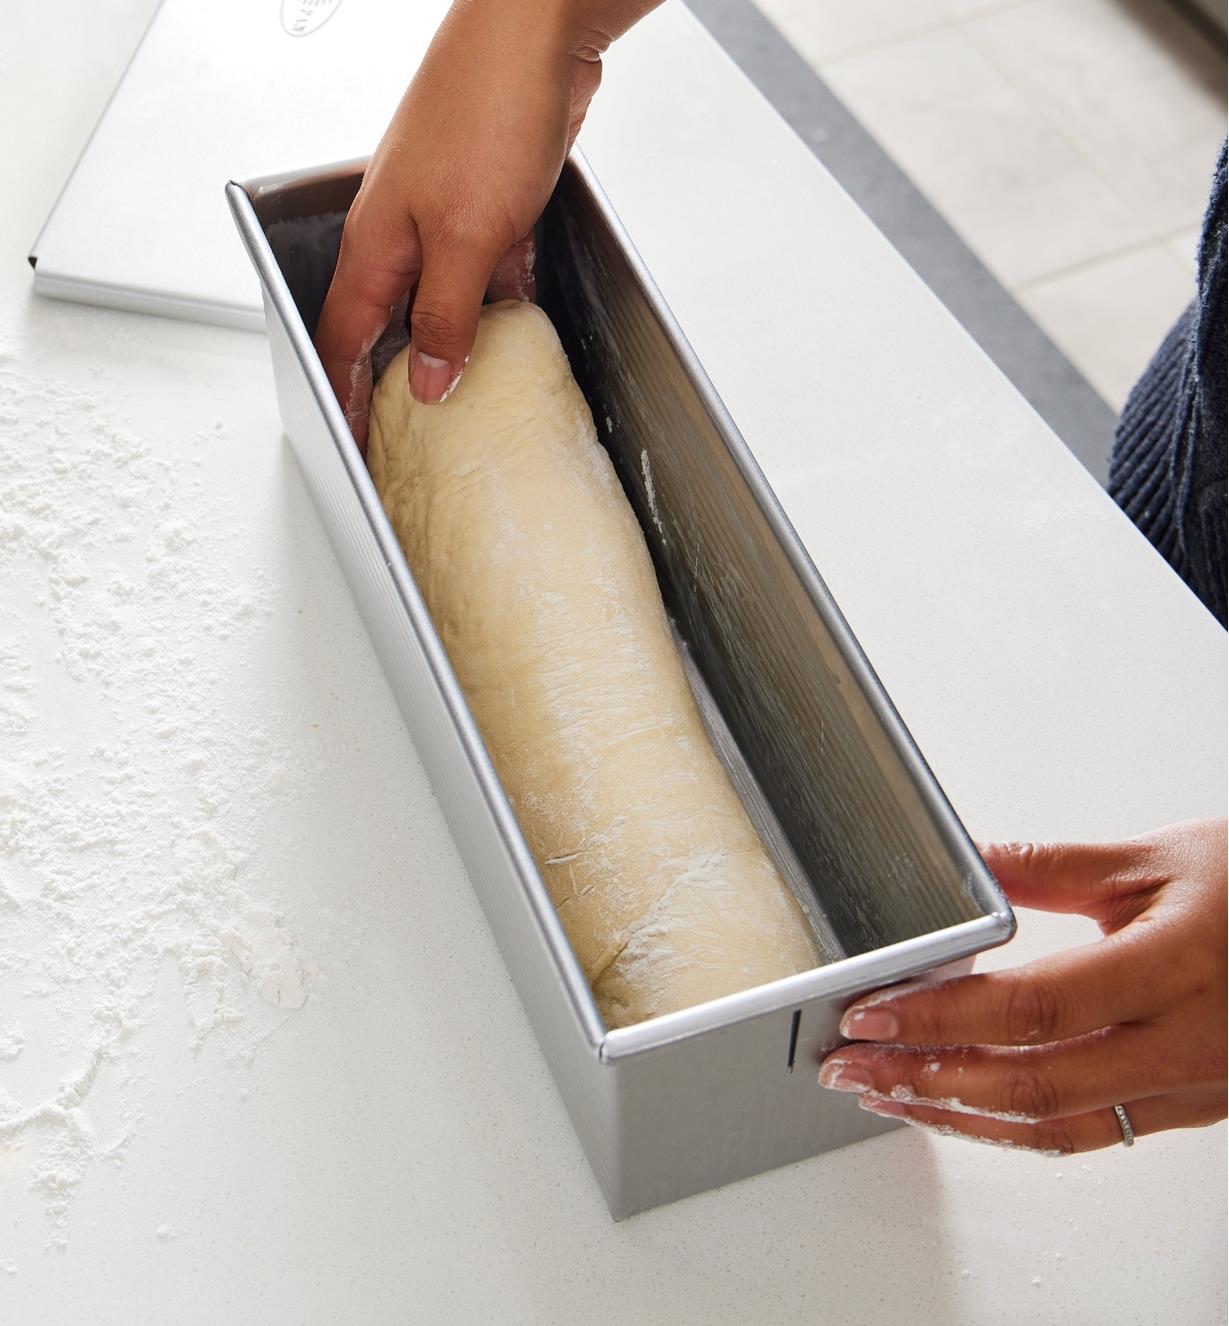 Placing bread dough in the Pullman loaf pan